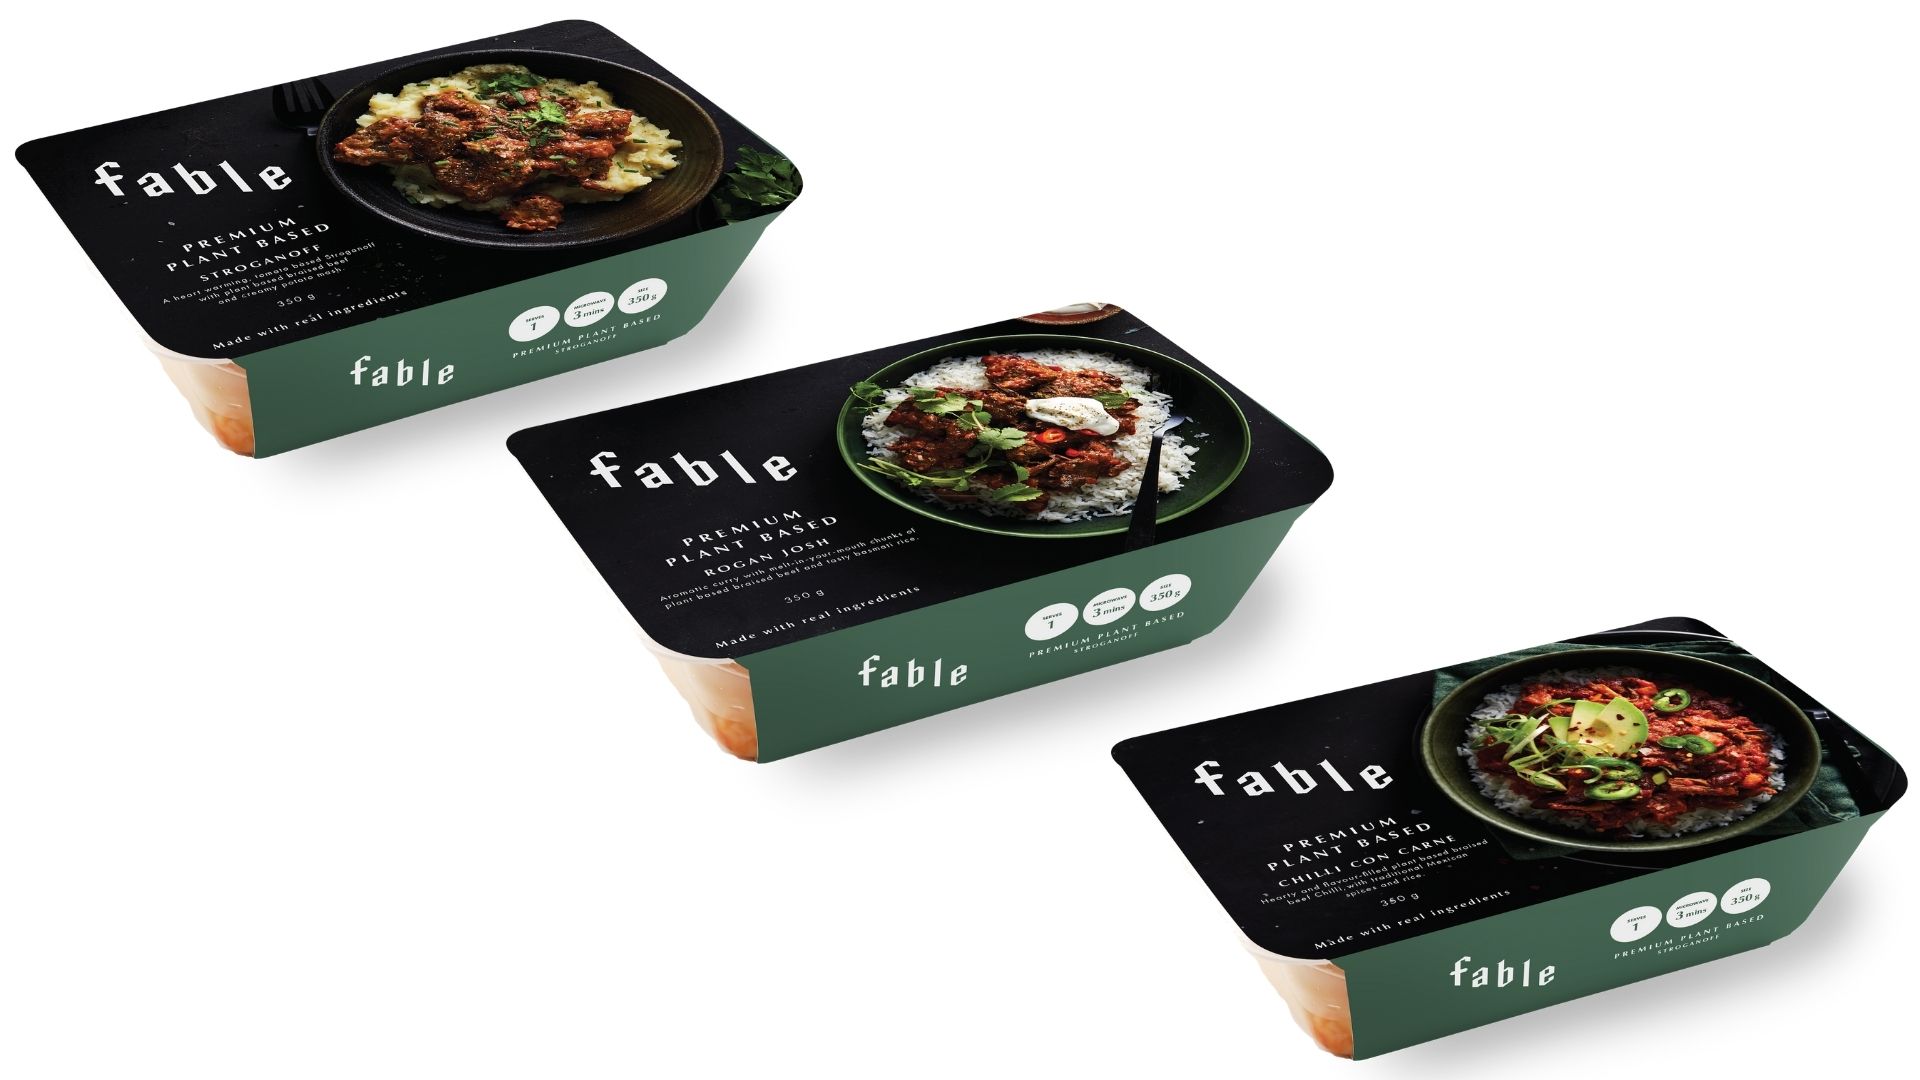 Fable's plant based "beef" ready made meals.